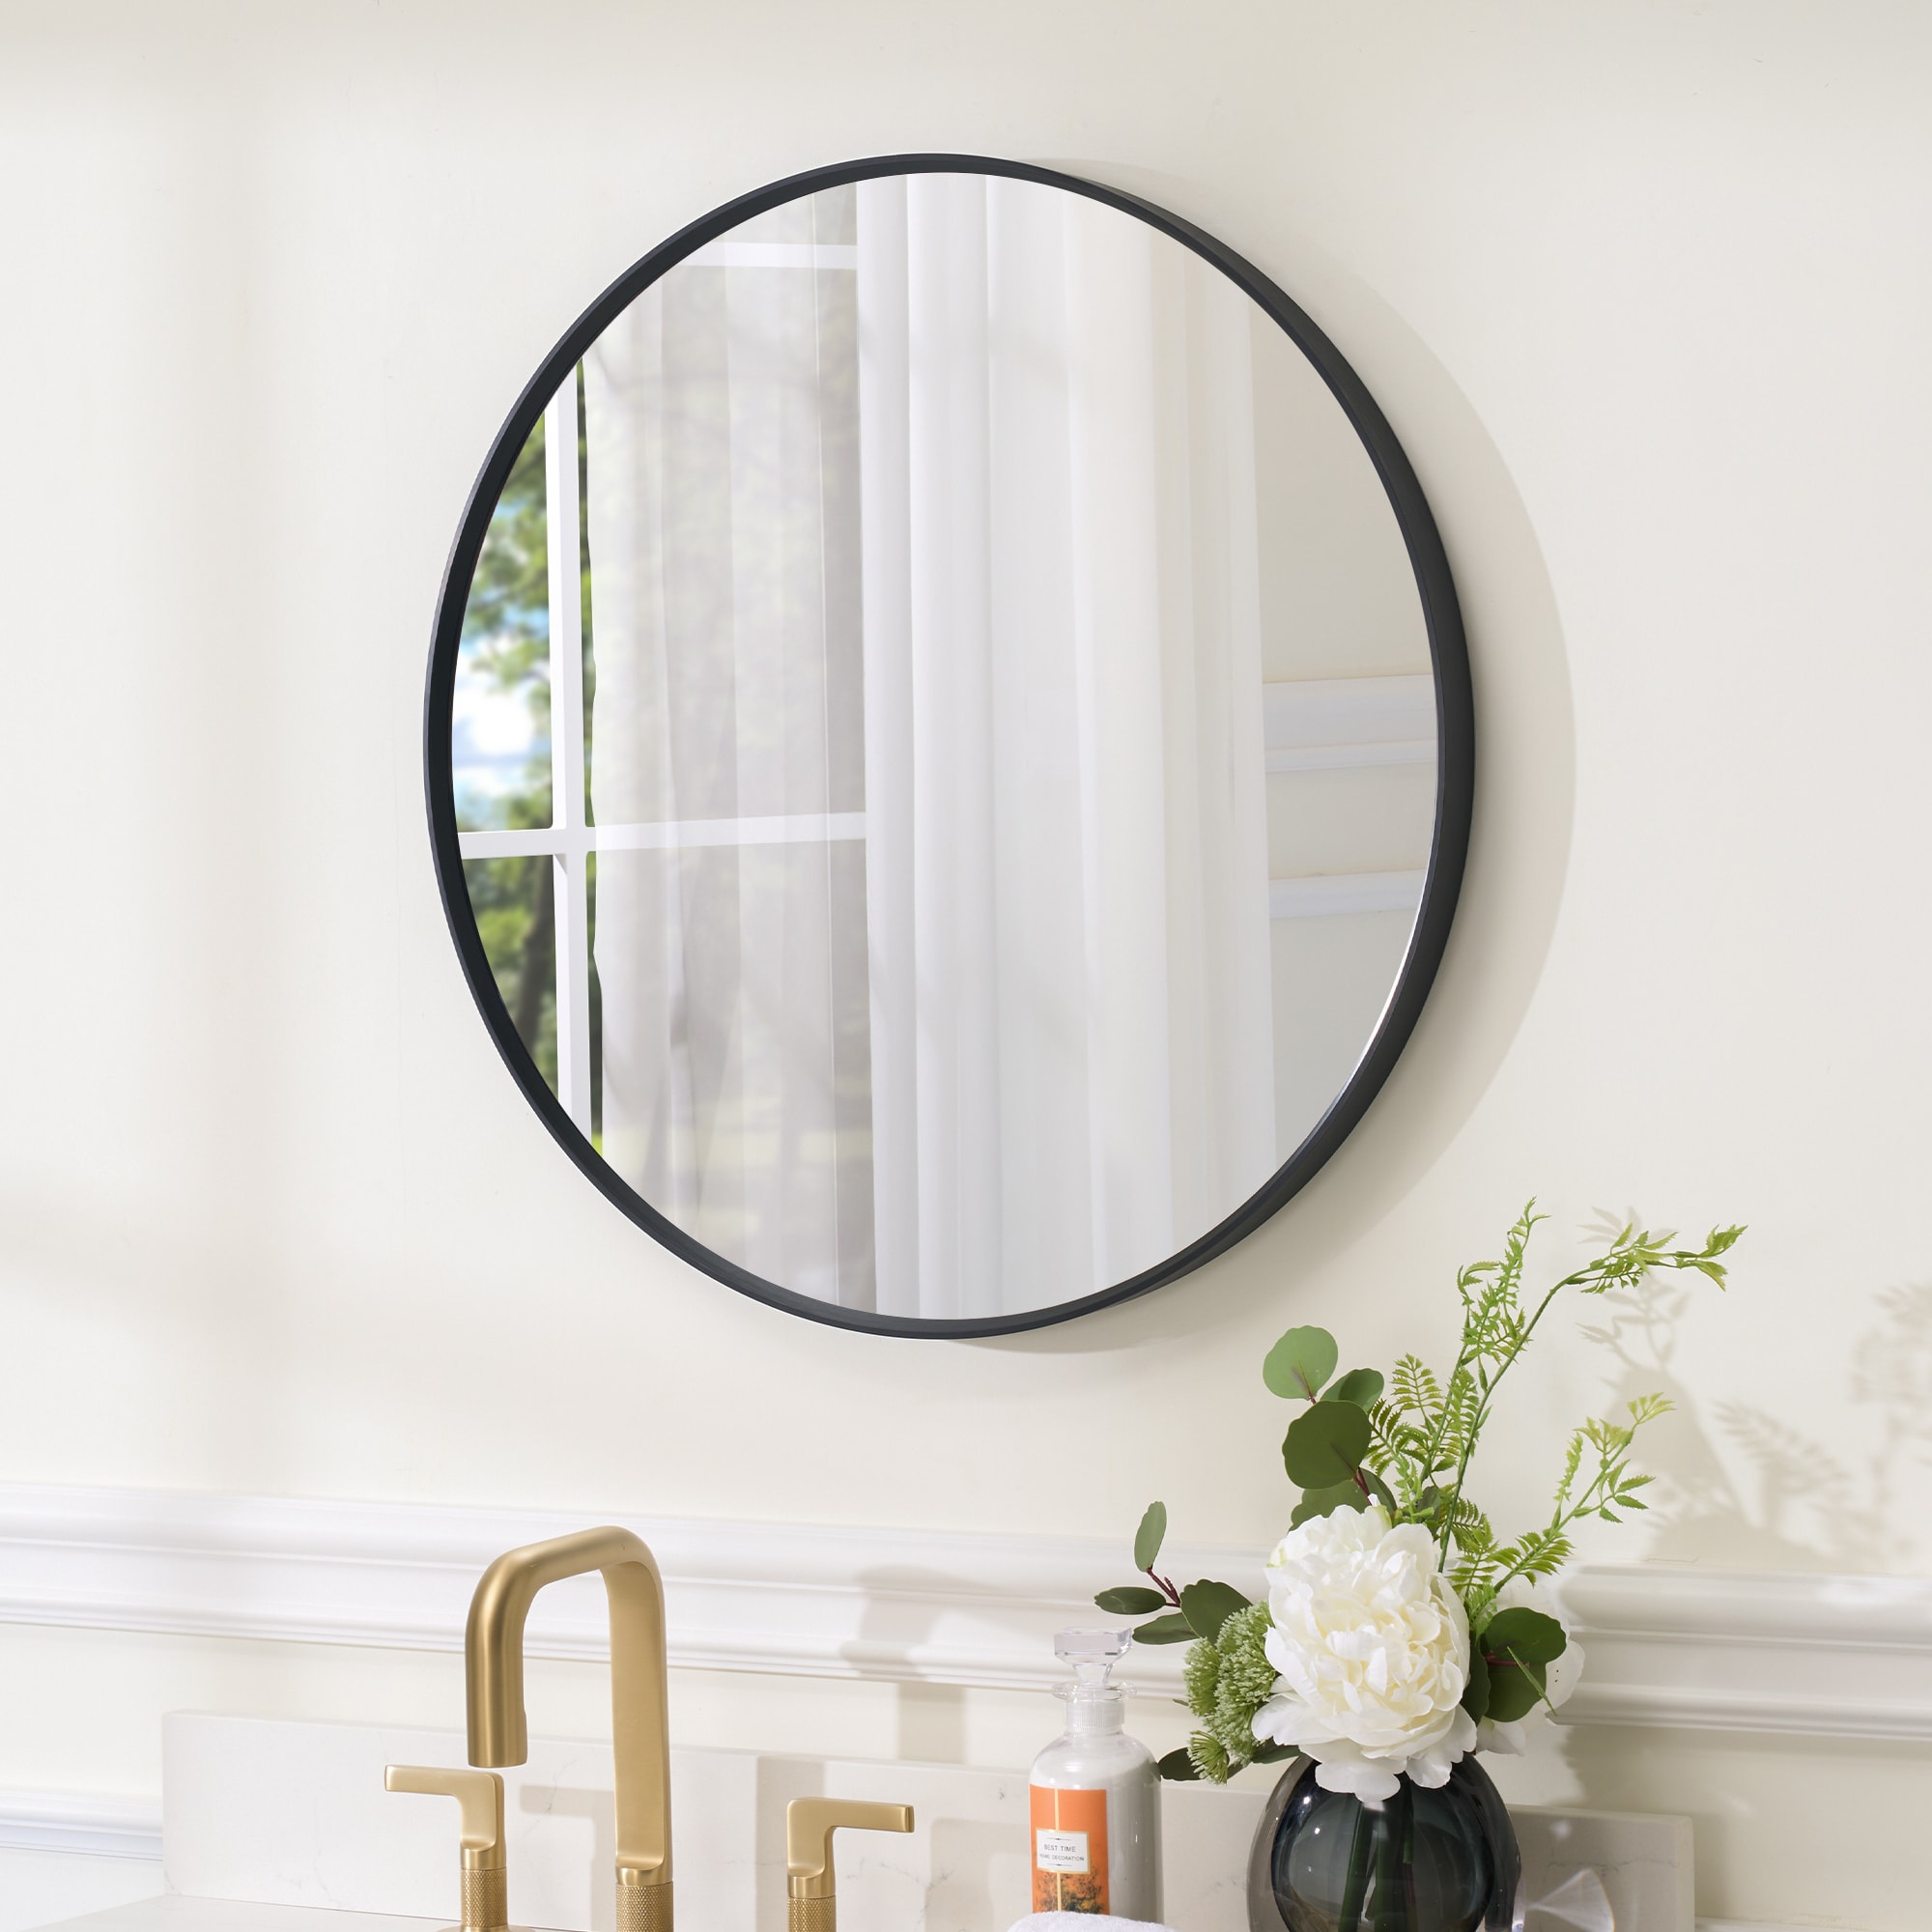 Neutype 28 inch Round Mirror Circle Mirrors , Gold , Wall Mounted Deep Set Aluminum Alloy Frame for Bathroom, Living Room, Bedroom